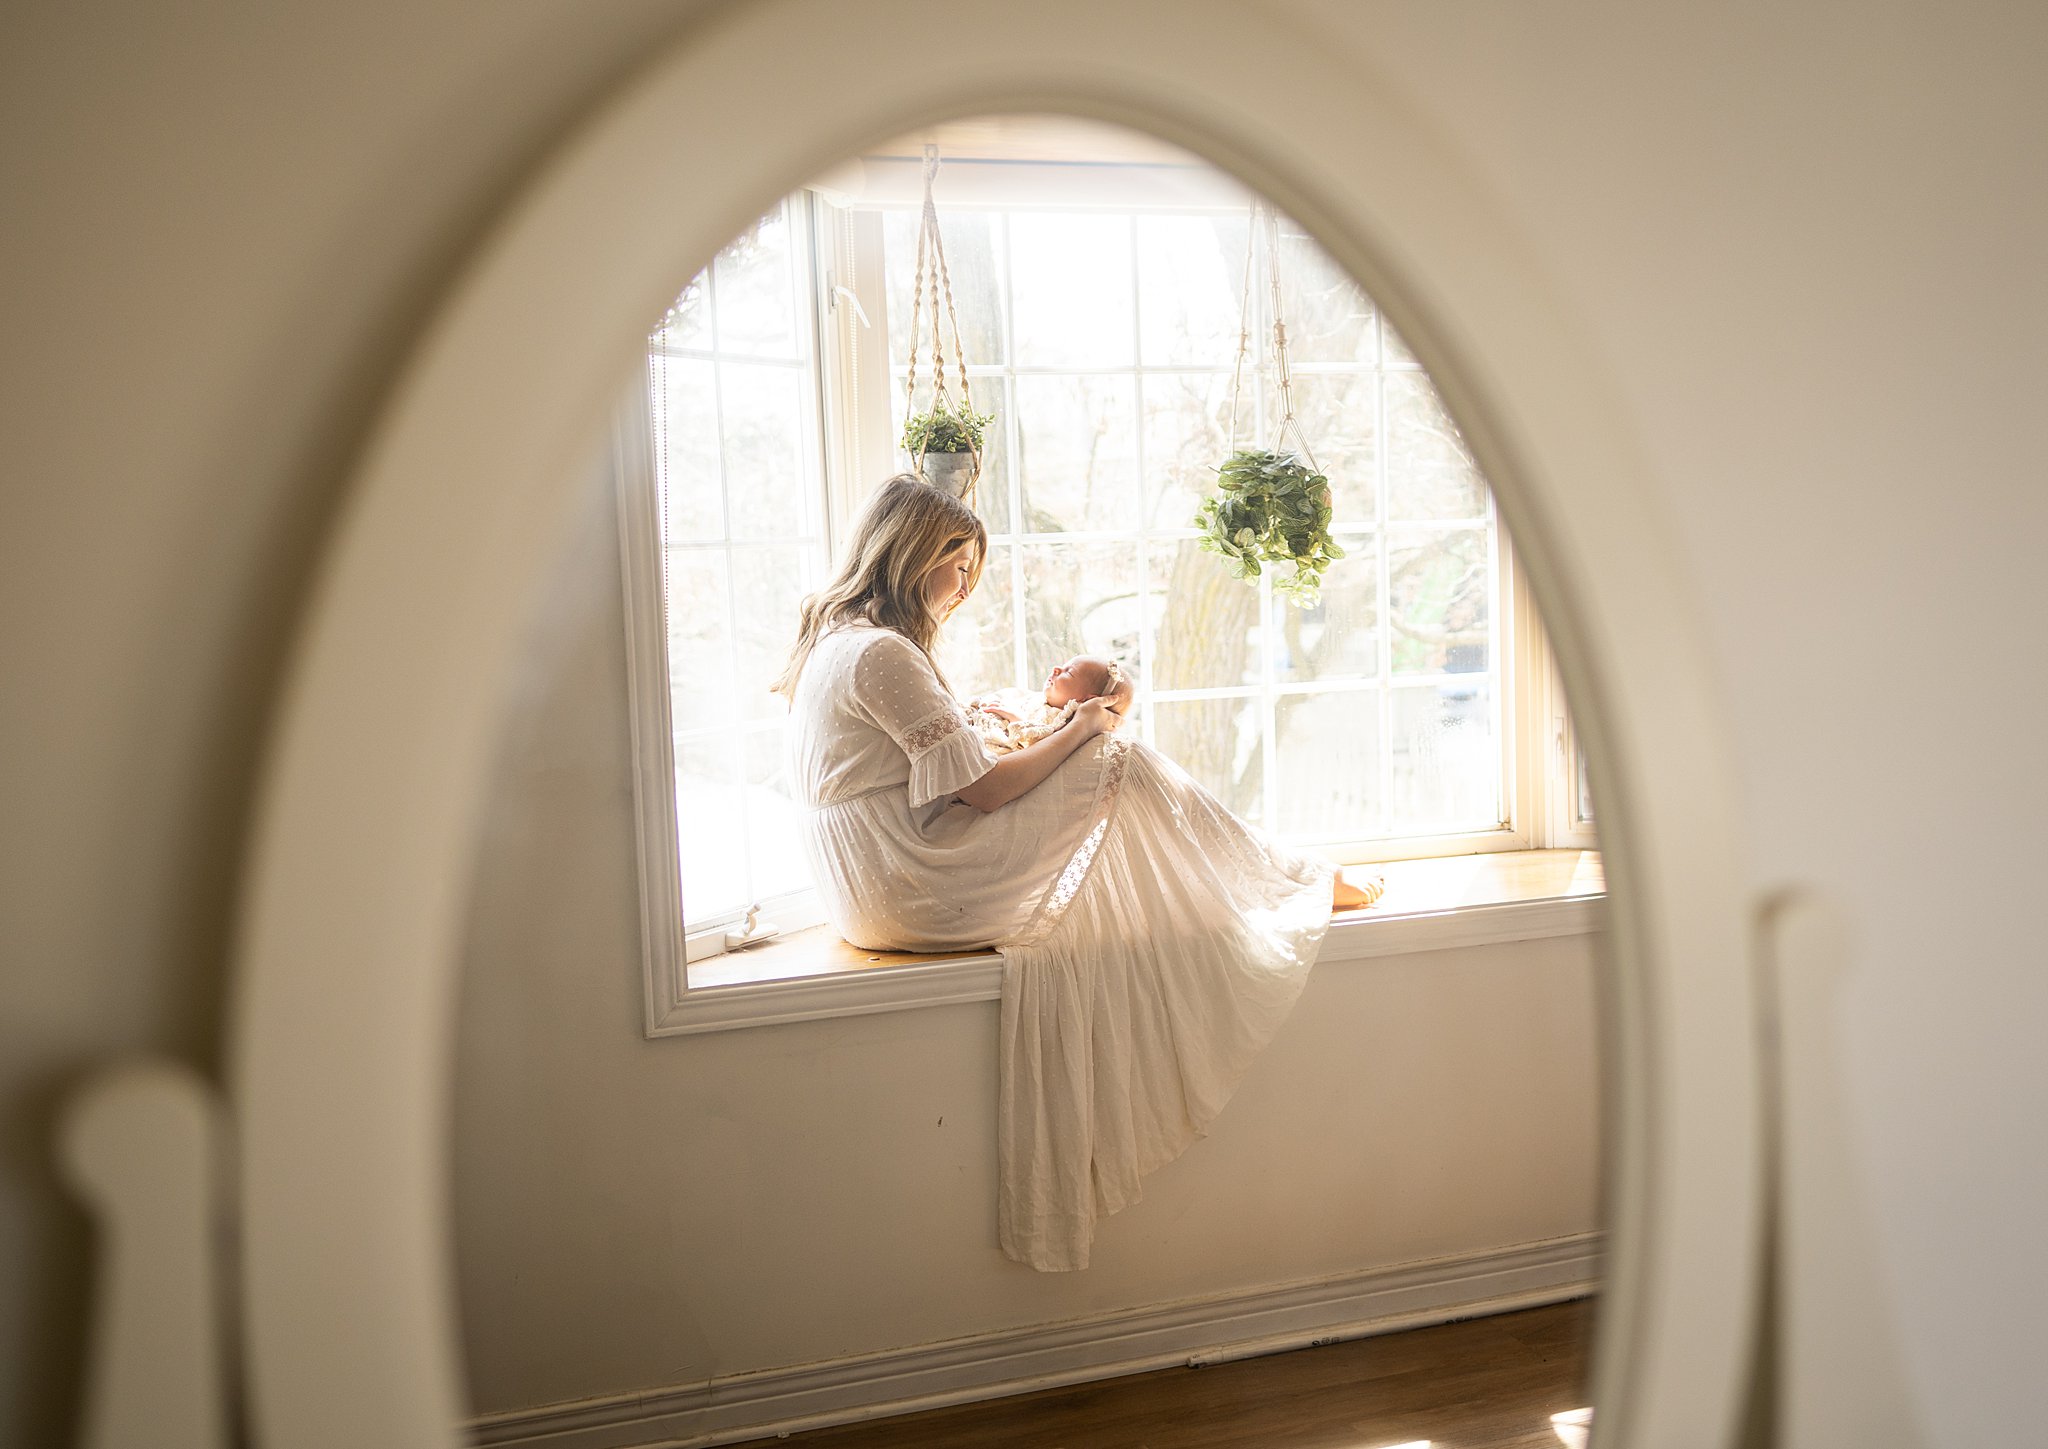 A mother in a white dress sits in a bay window looking down at her newborn baby in her lap ottawa prenatal massage